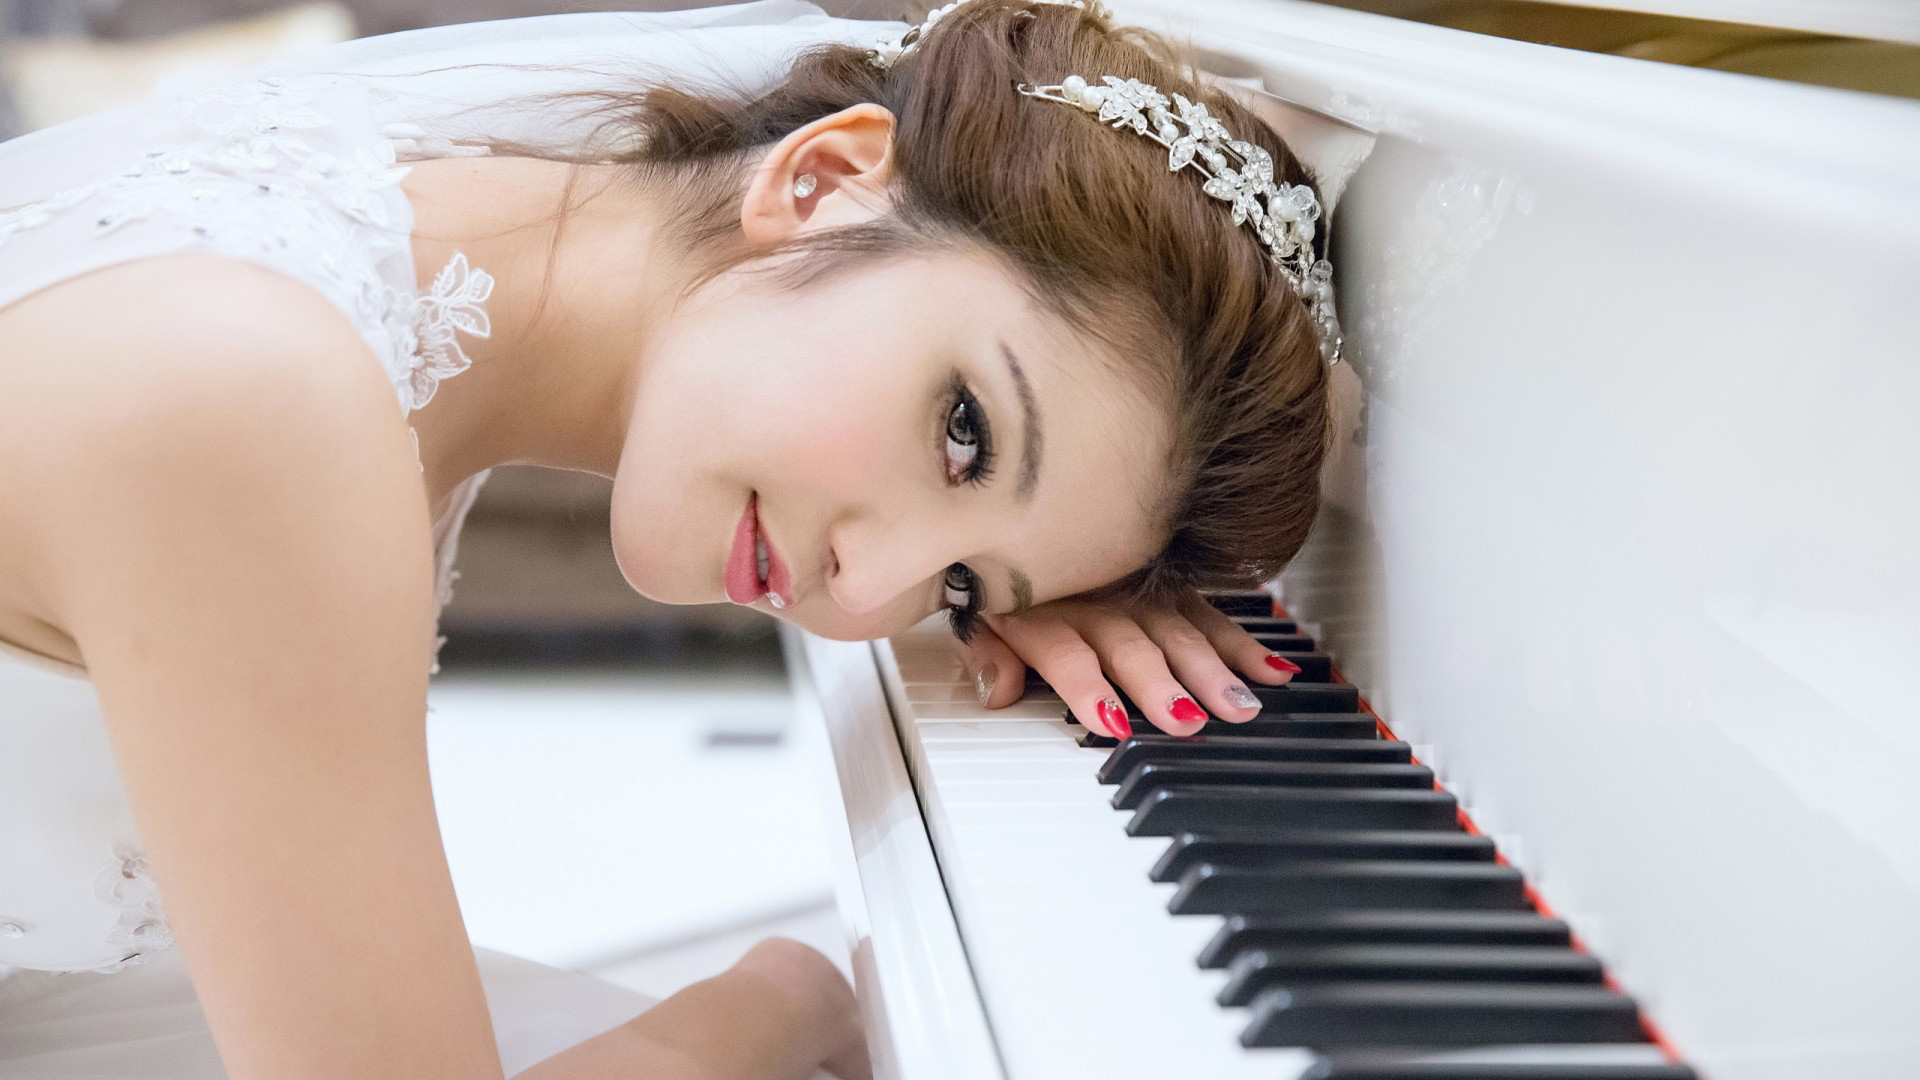 People 1920x1080 women model photography Asian wedding dress musical instrument piano face painted nails portrait brides hair ornament